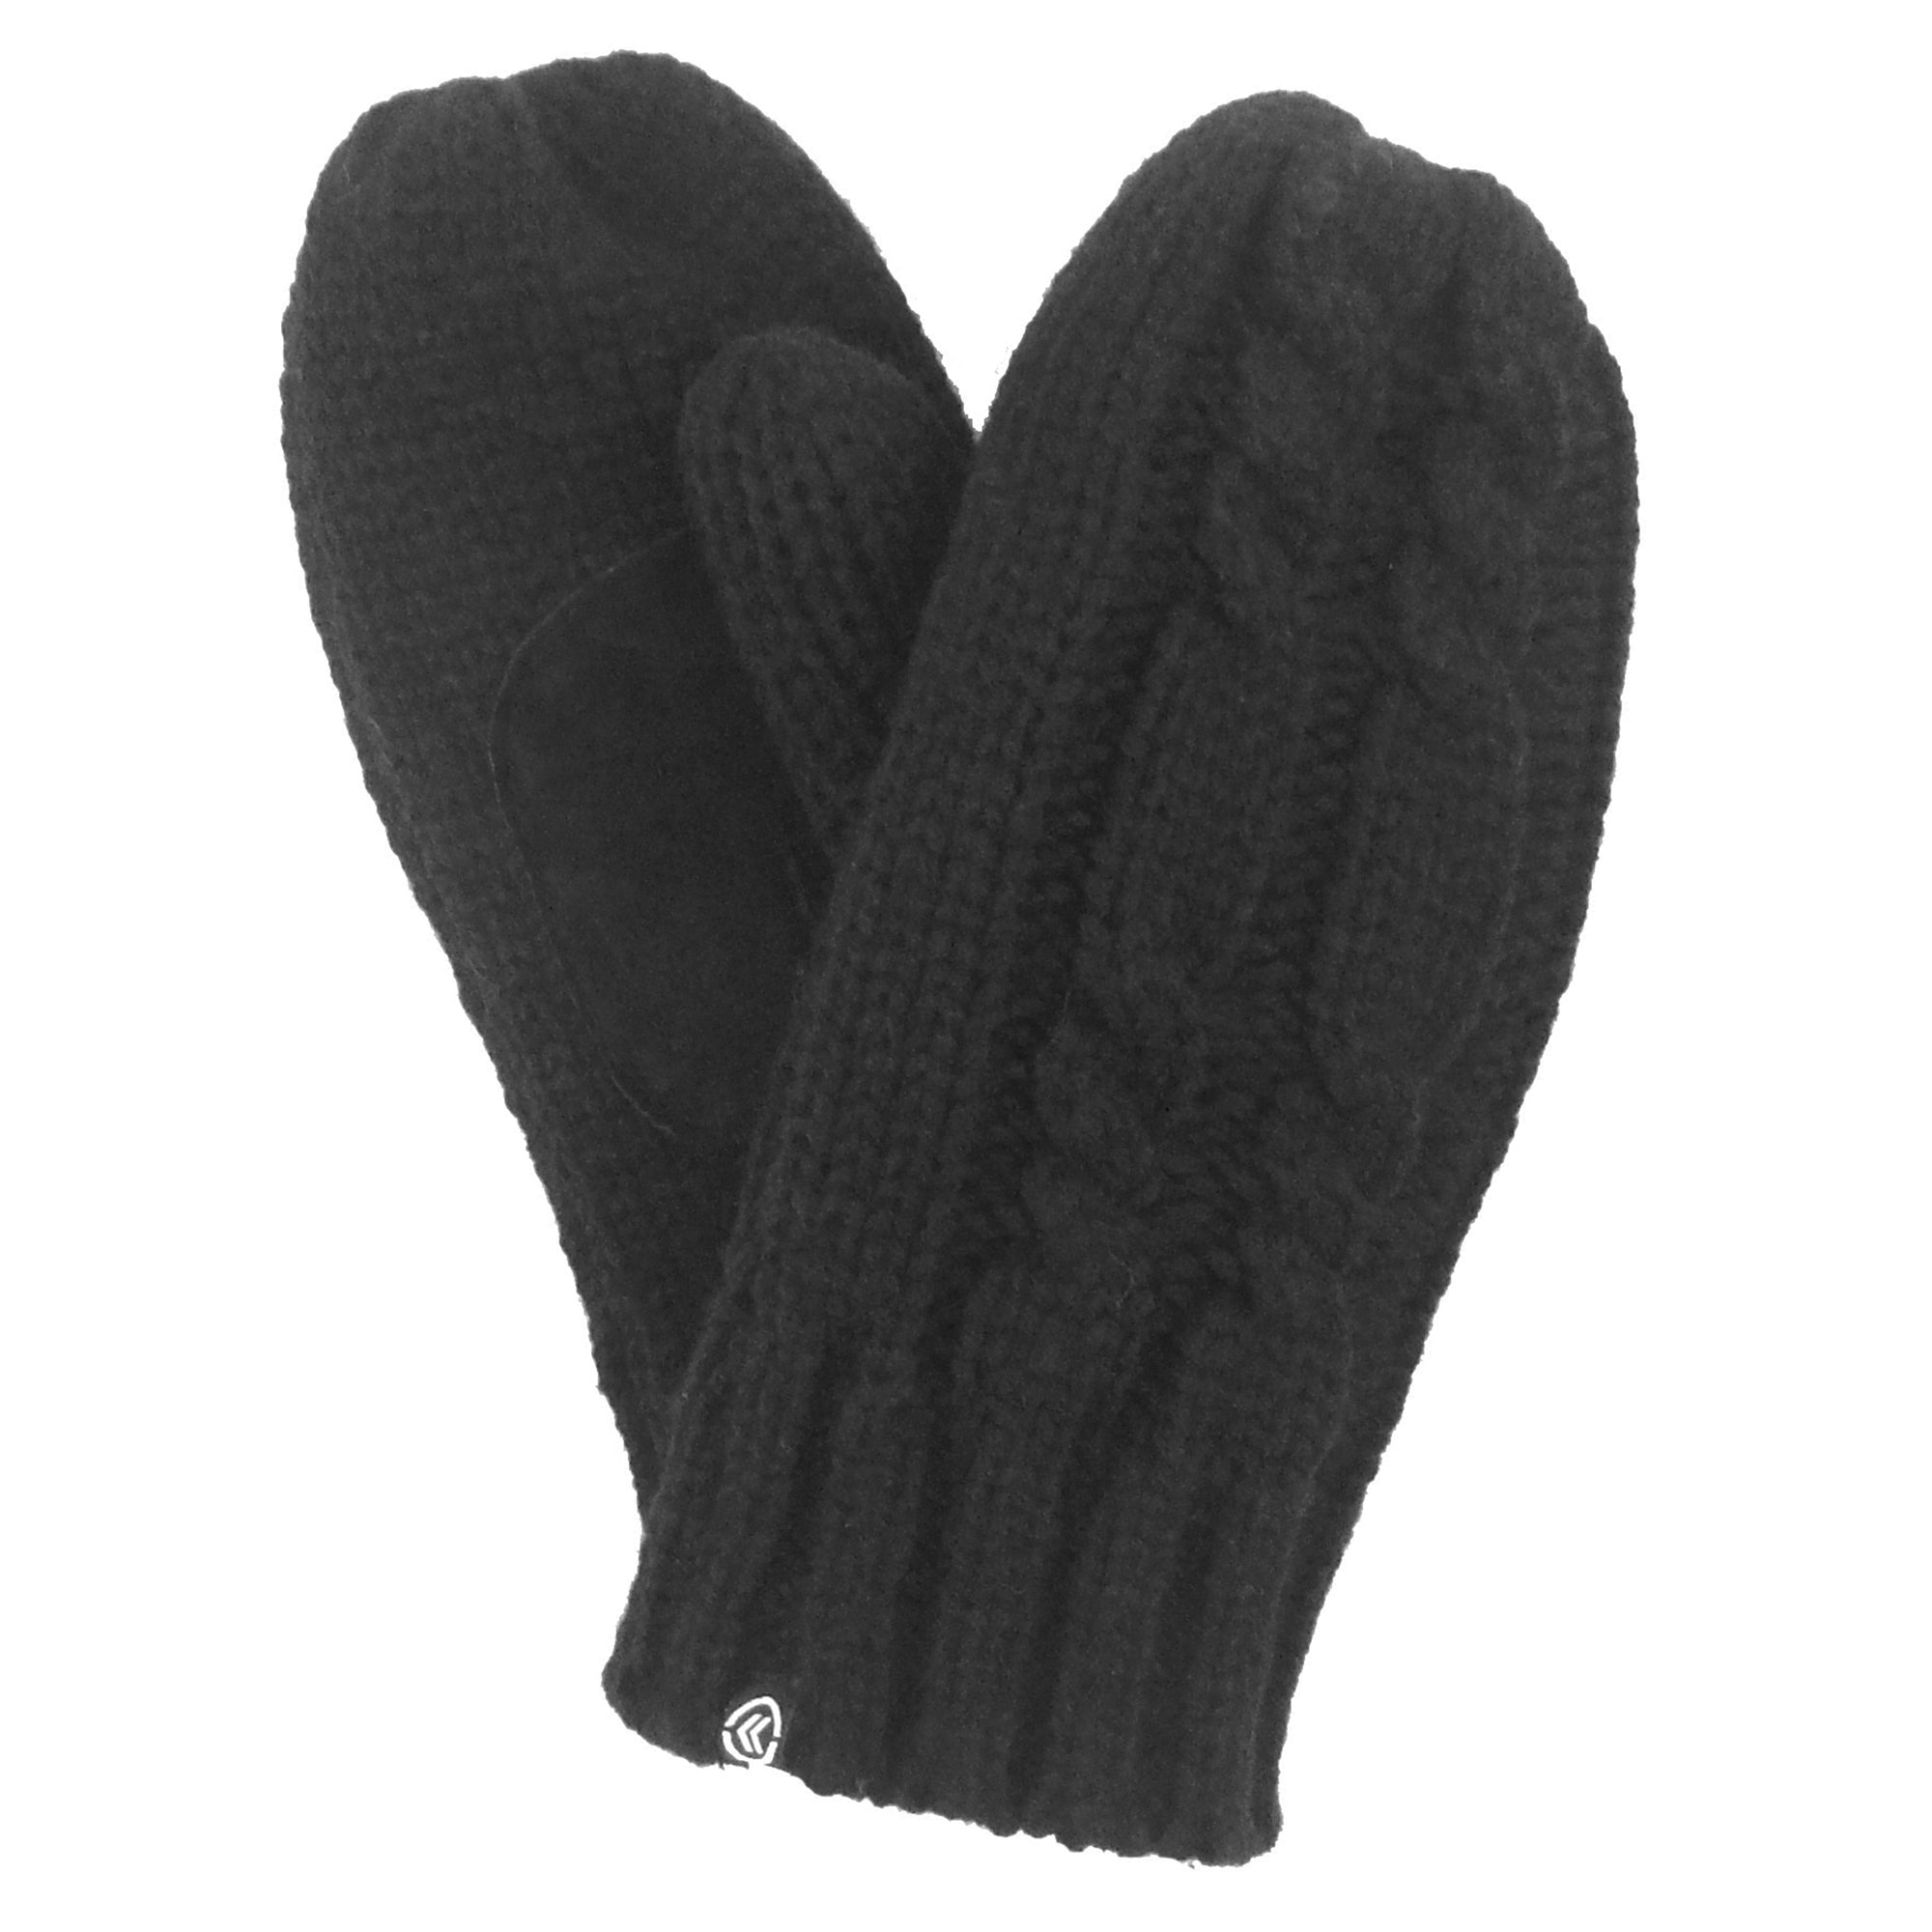 Isotoner Women's Cable Knit Mitten